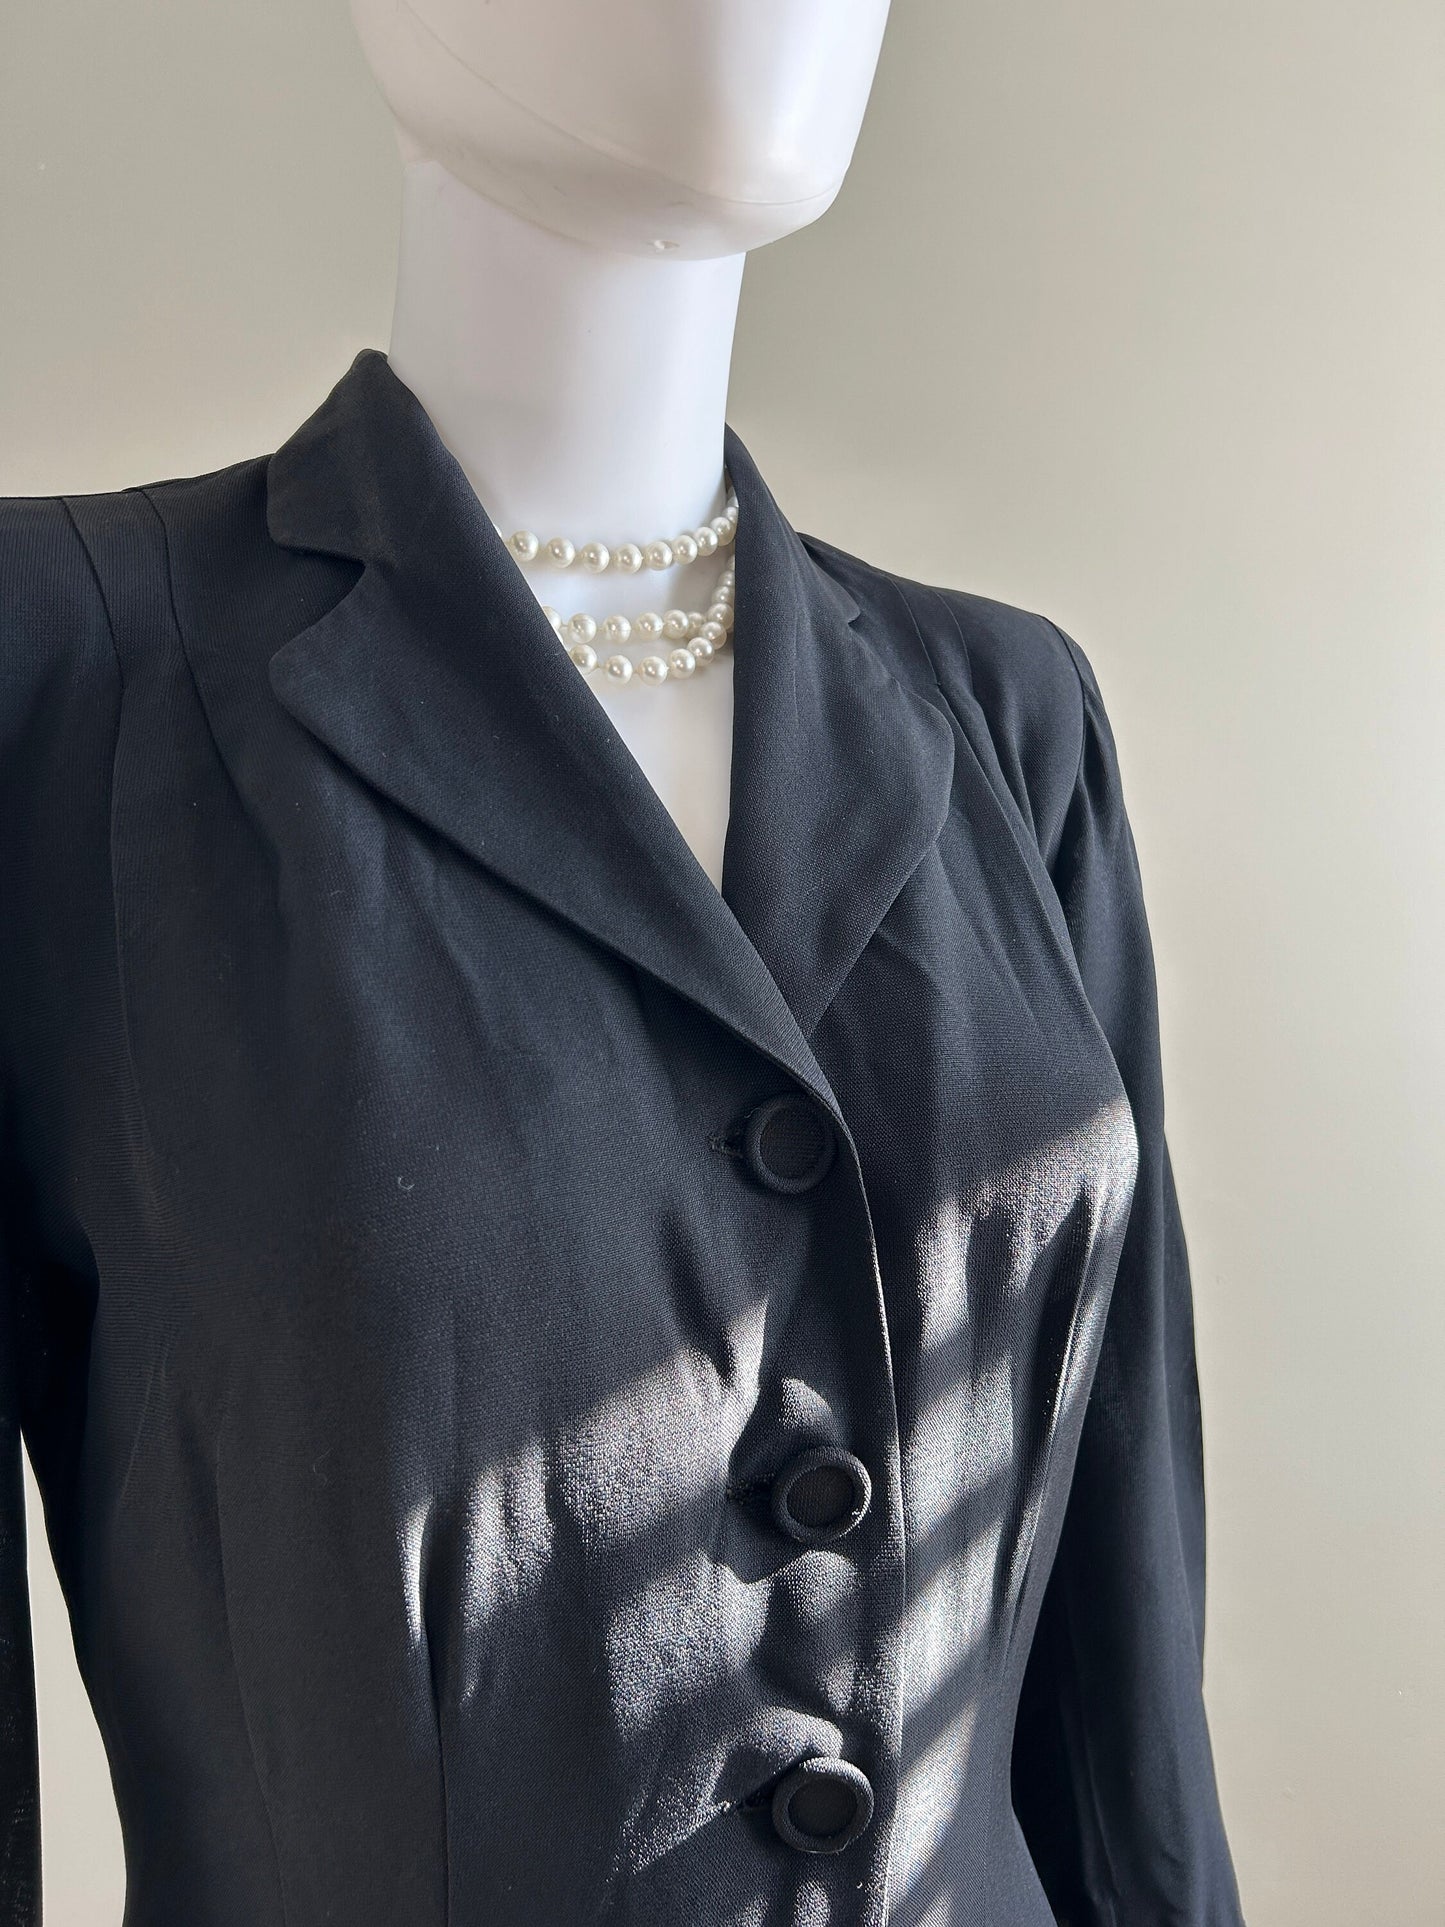 Vintage Early 1940s Black Rayon Skirt Suit / 40s Skirt and Blazer / Size S M